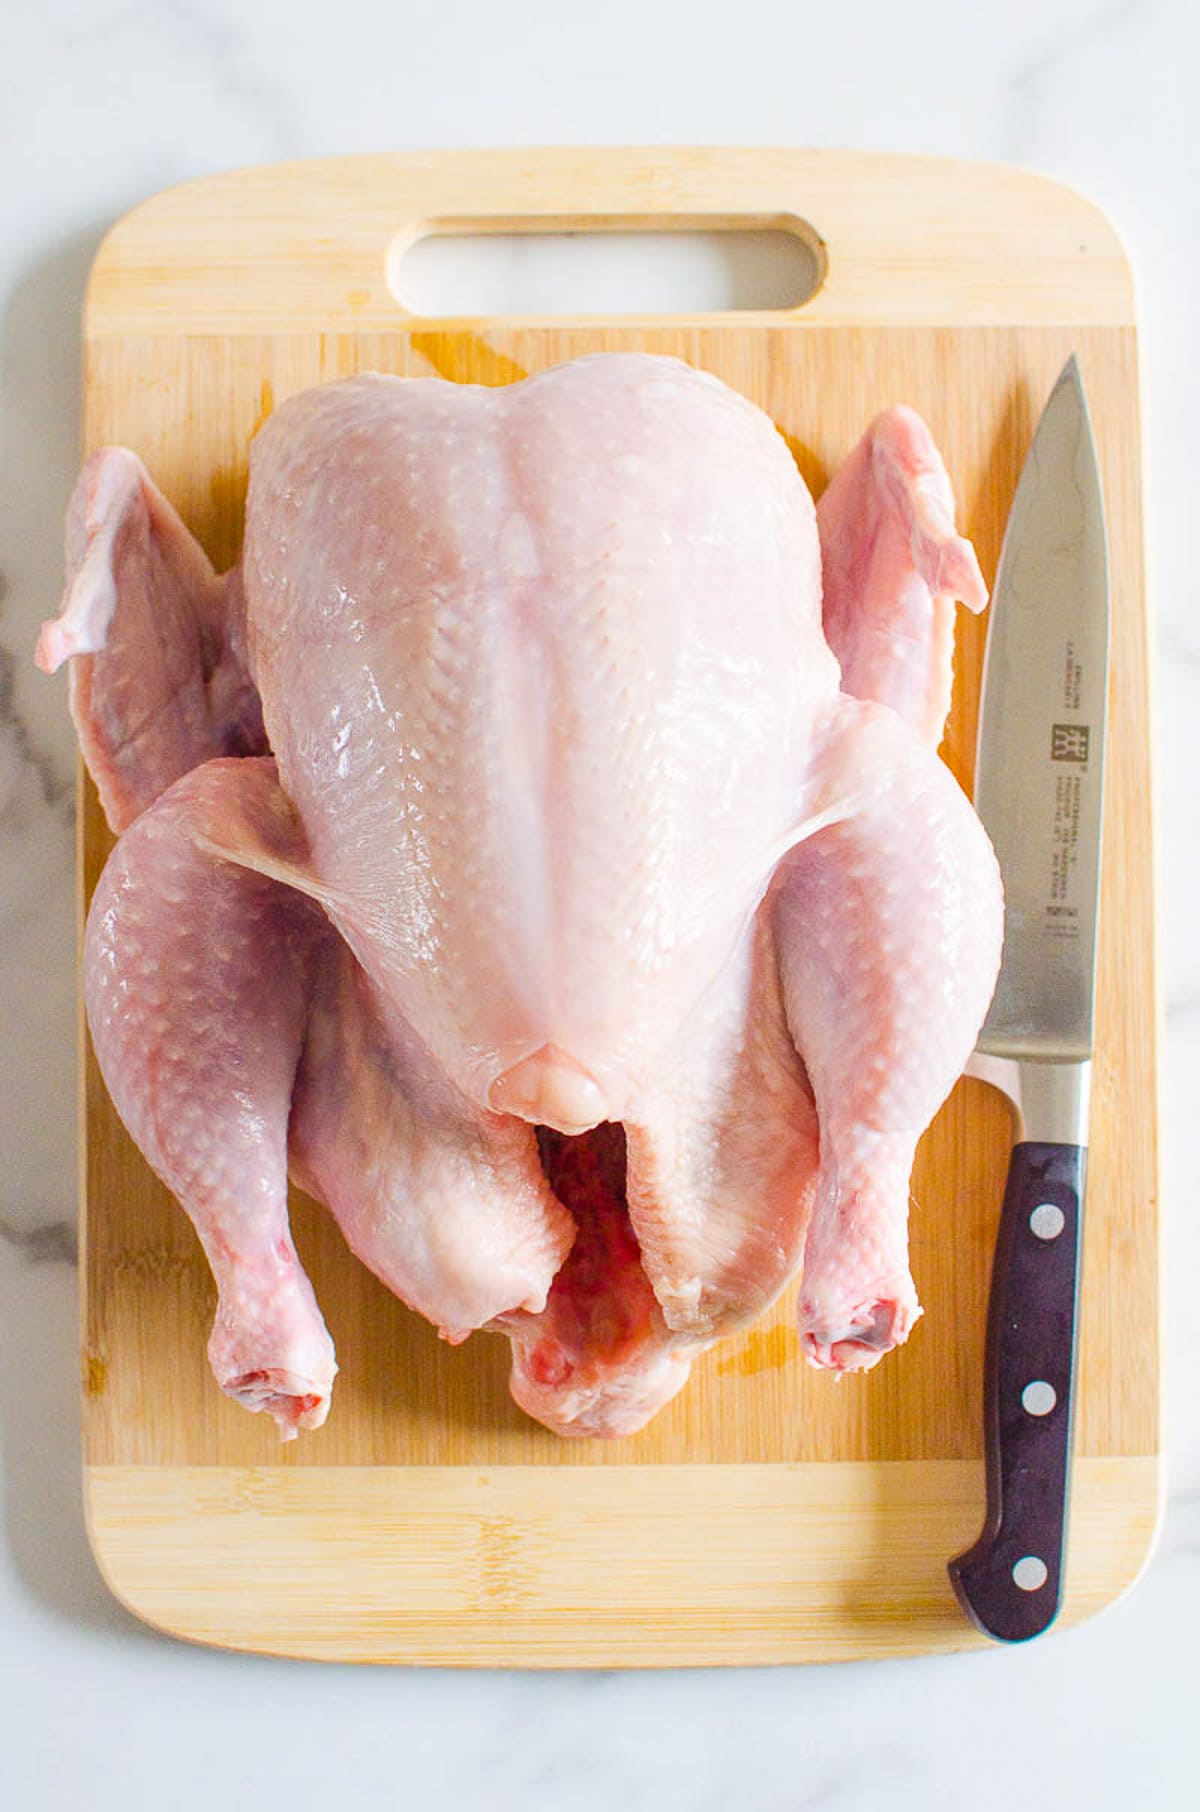 Whole chicken on a cutting board with a knife.